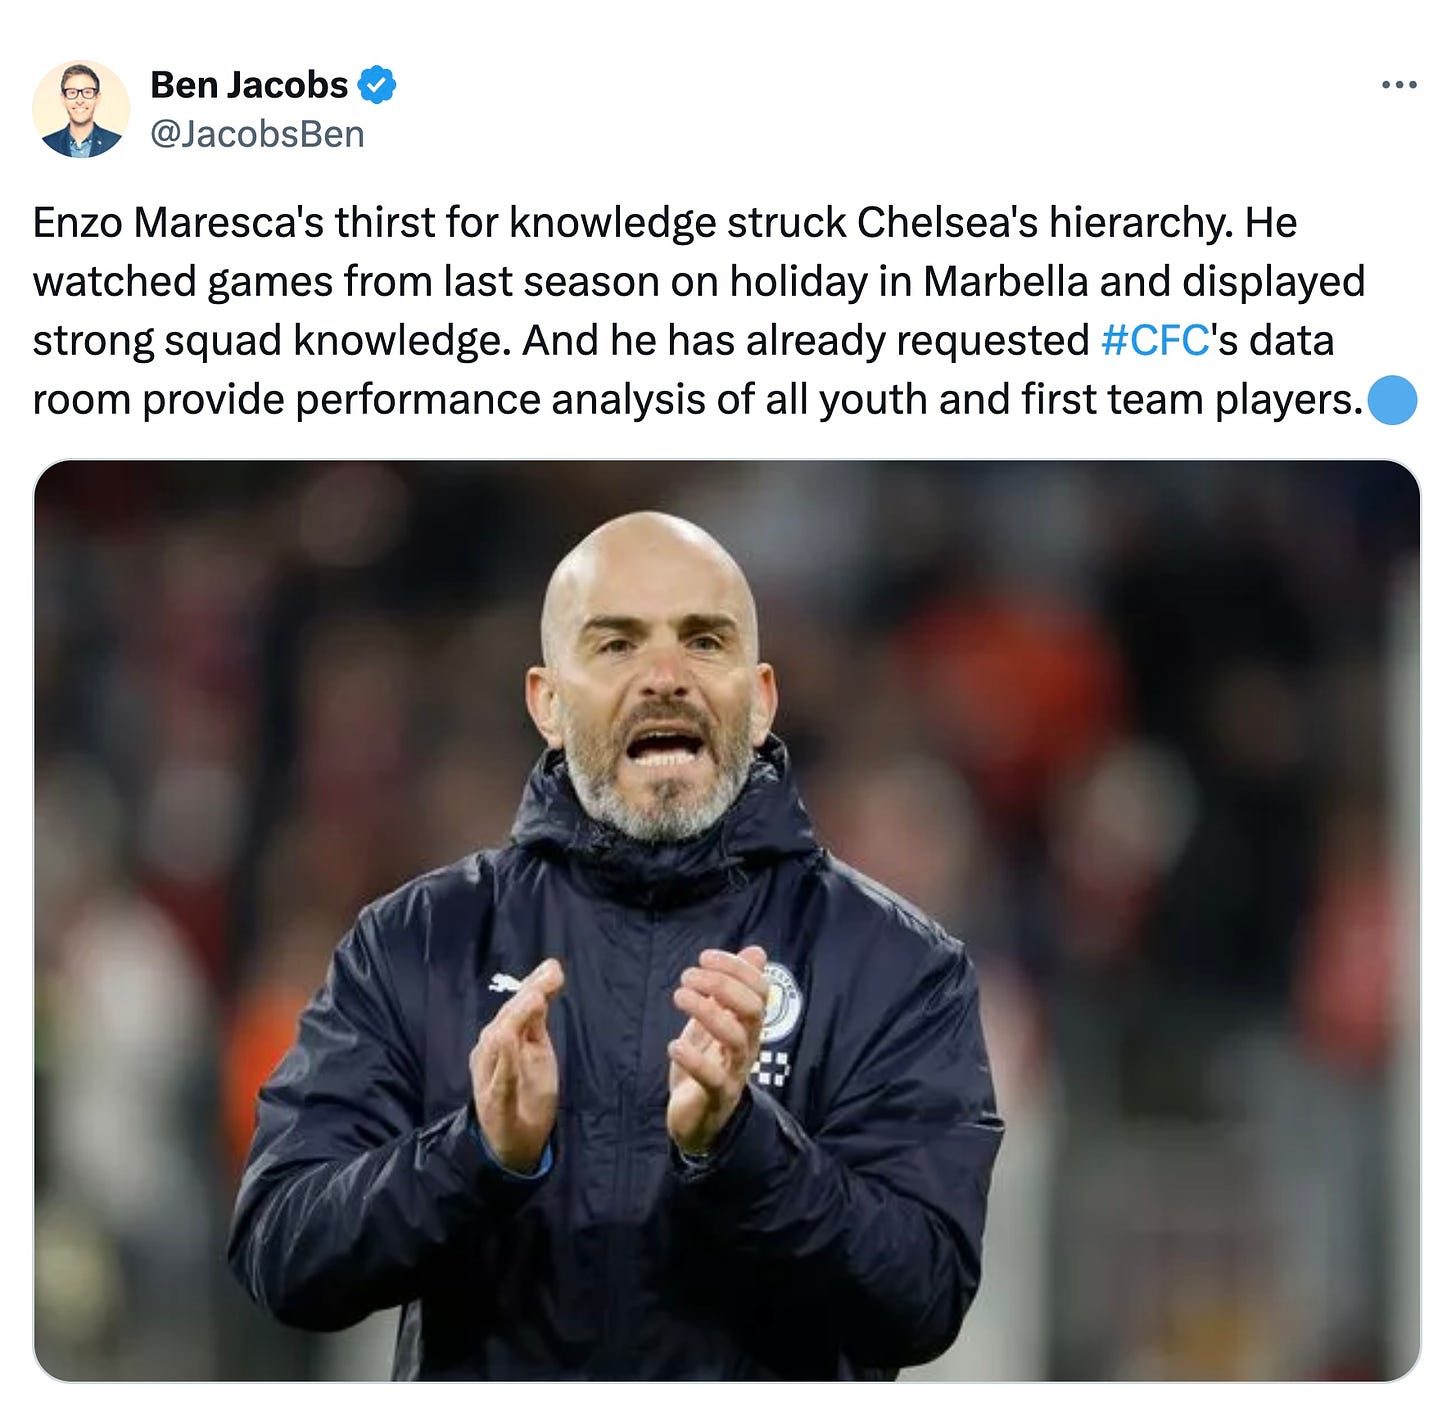 A tweet by Ben Jacobs about why Chelsea hired Enzo Maresca